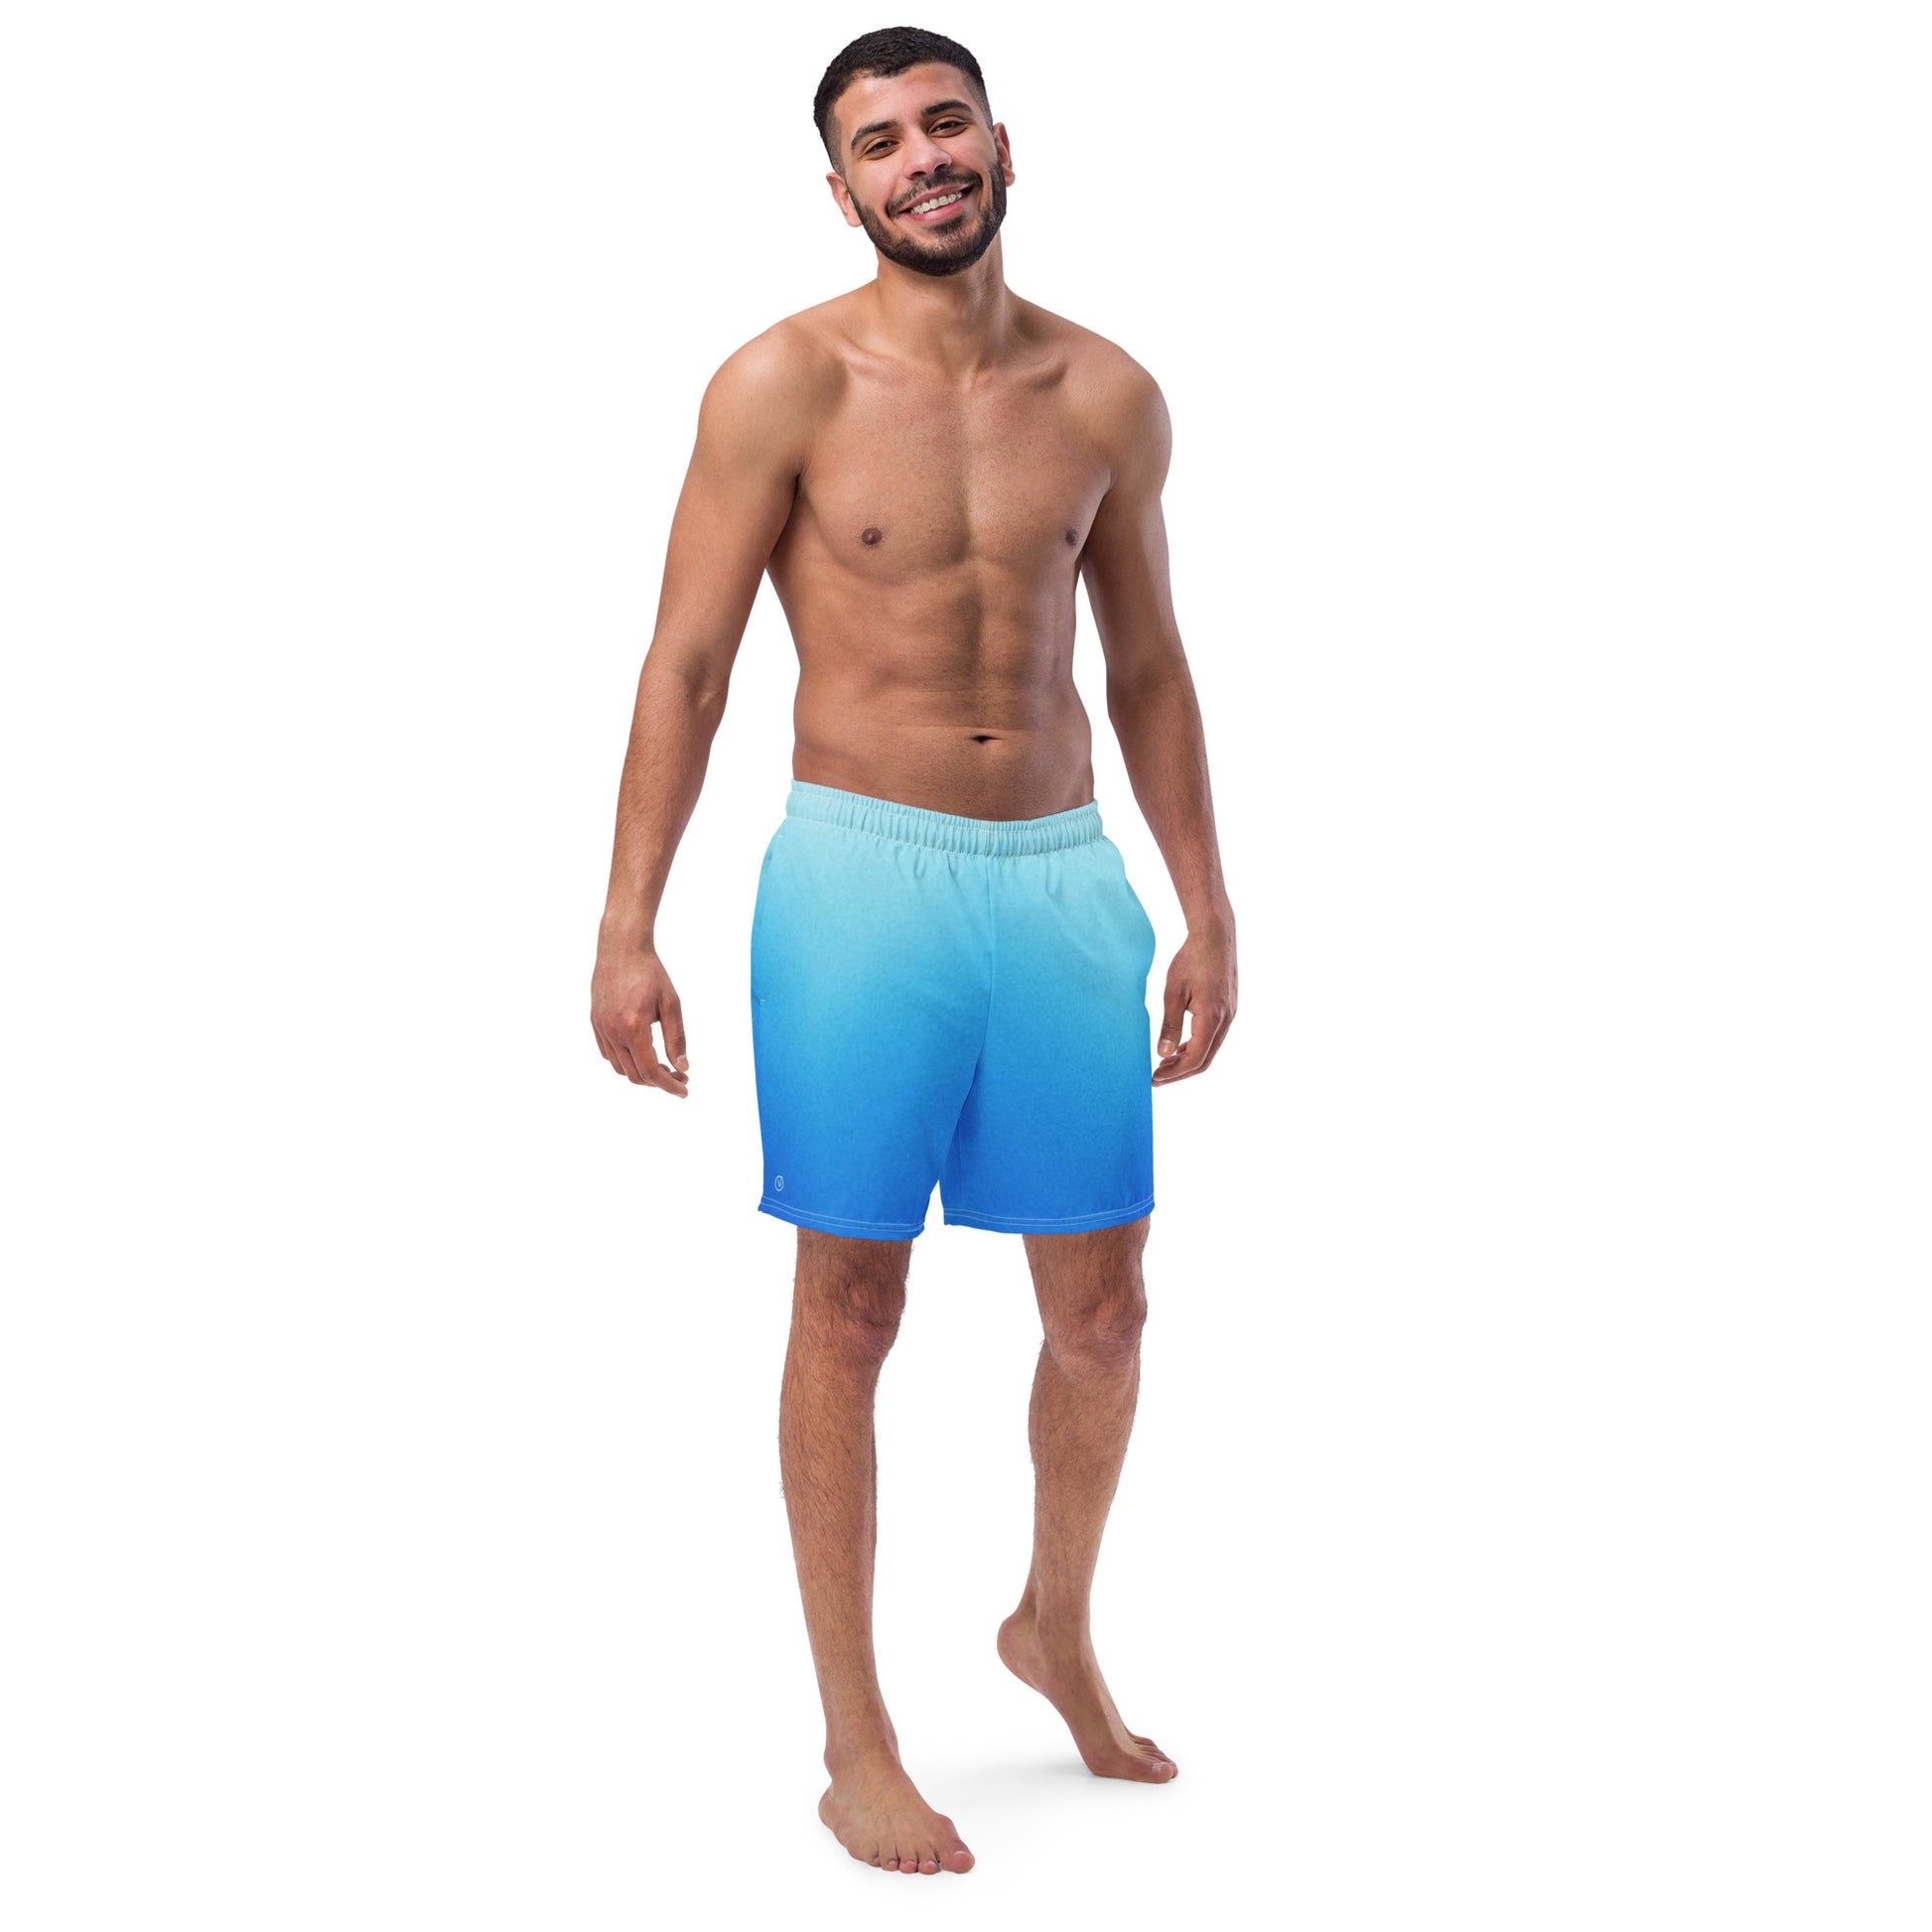 Humble Sportswear, men's blue gradient breathable swim trunks with mesh inner lining 